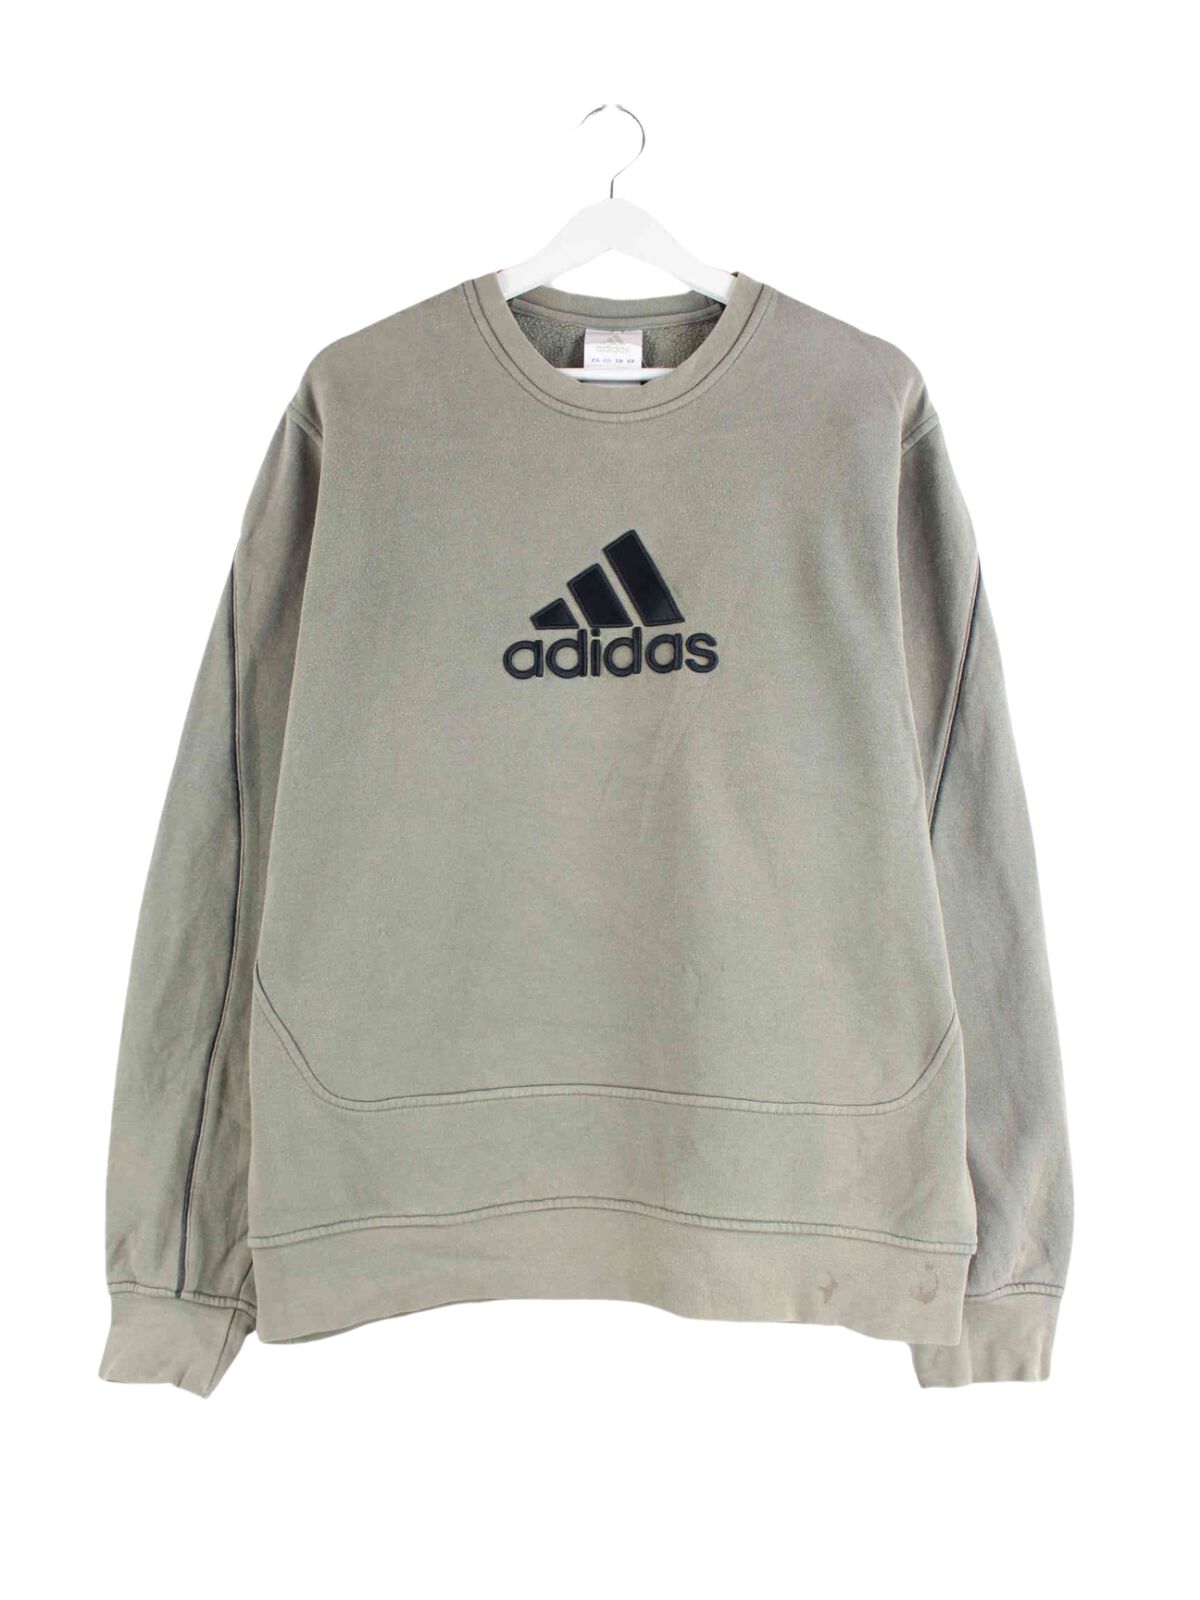 Adidas y2k Big Logo Embroidered Sweater Olive L (front image)